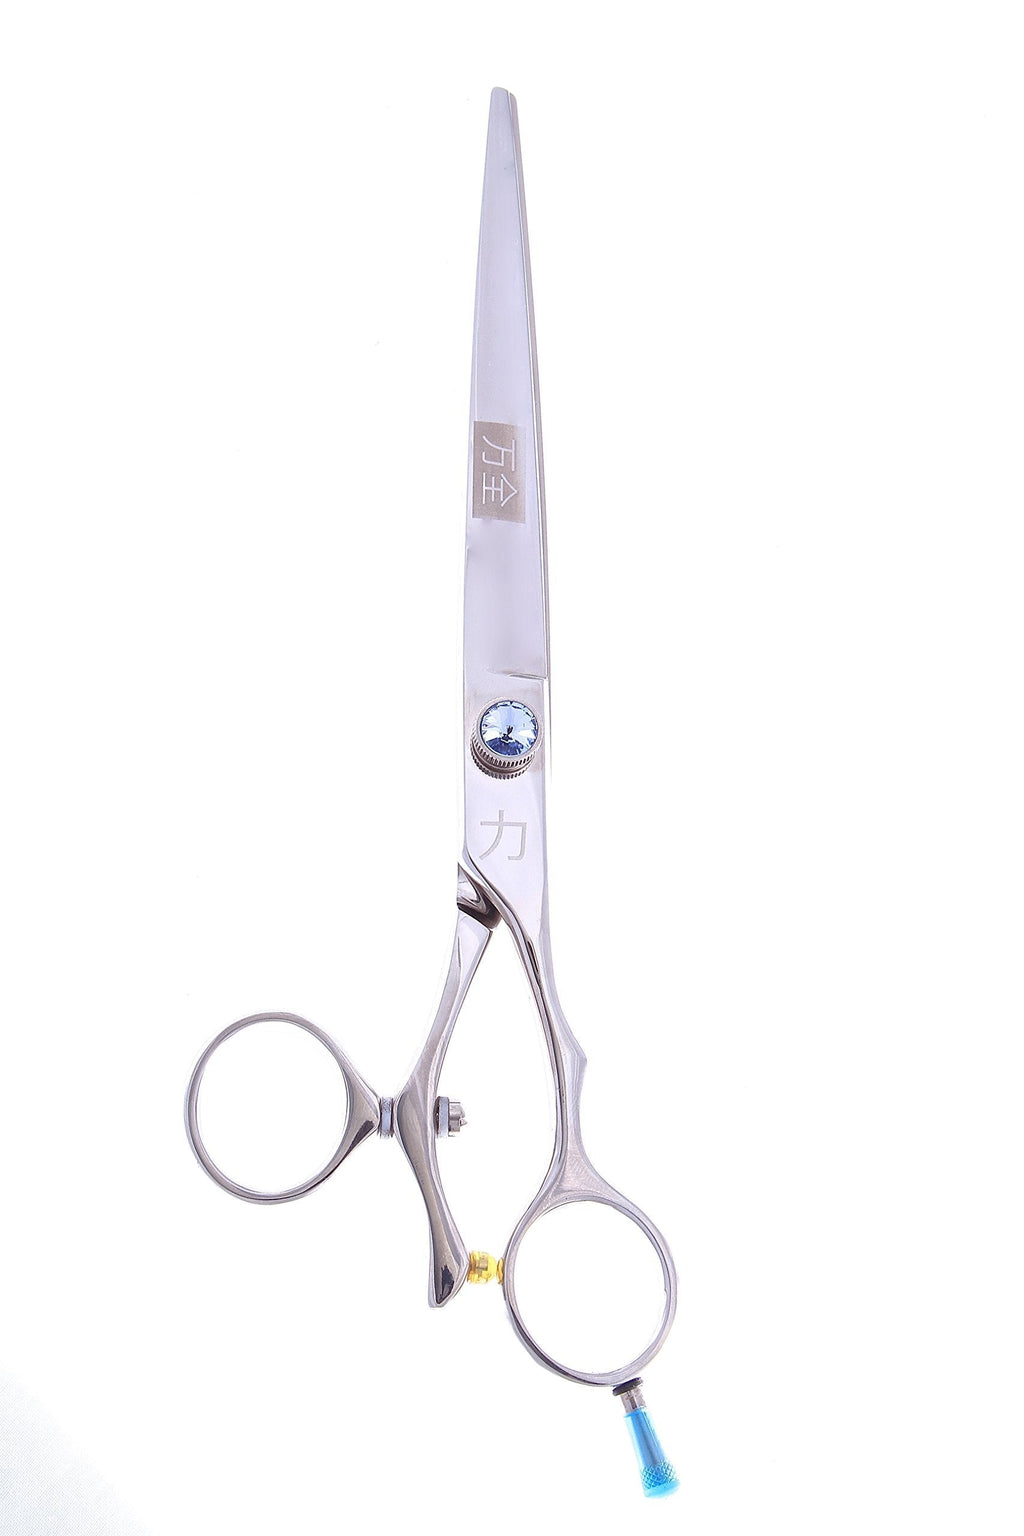 [Australia] - ShearsDirect Japanese 440C Off Set Swivel Cutting Shear with Blue Stone Tension, 8.0-Inch 